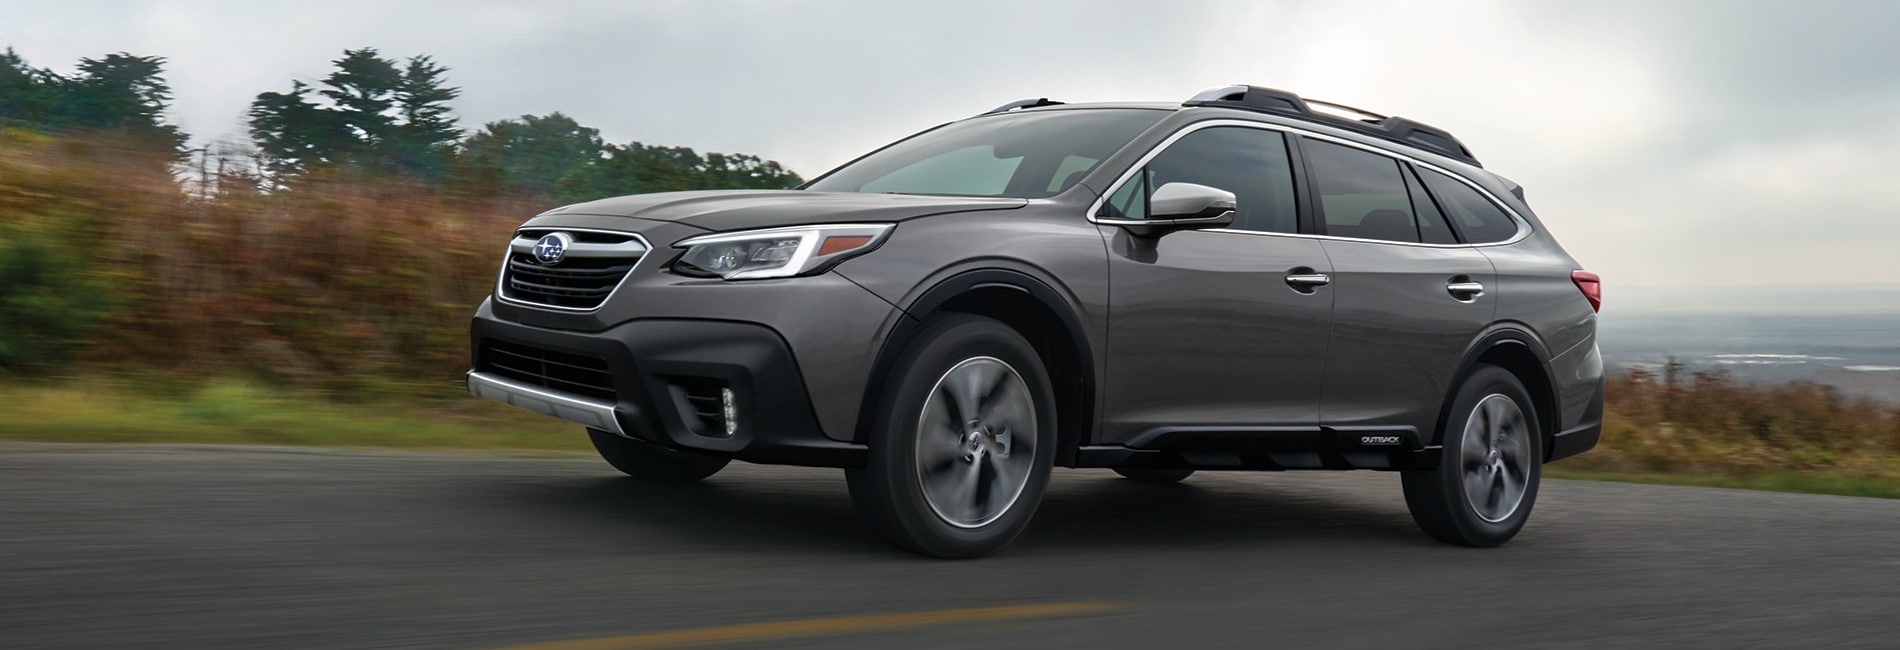 Subaru Outback Exterior Vehicle Features